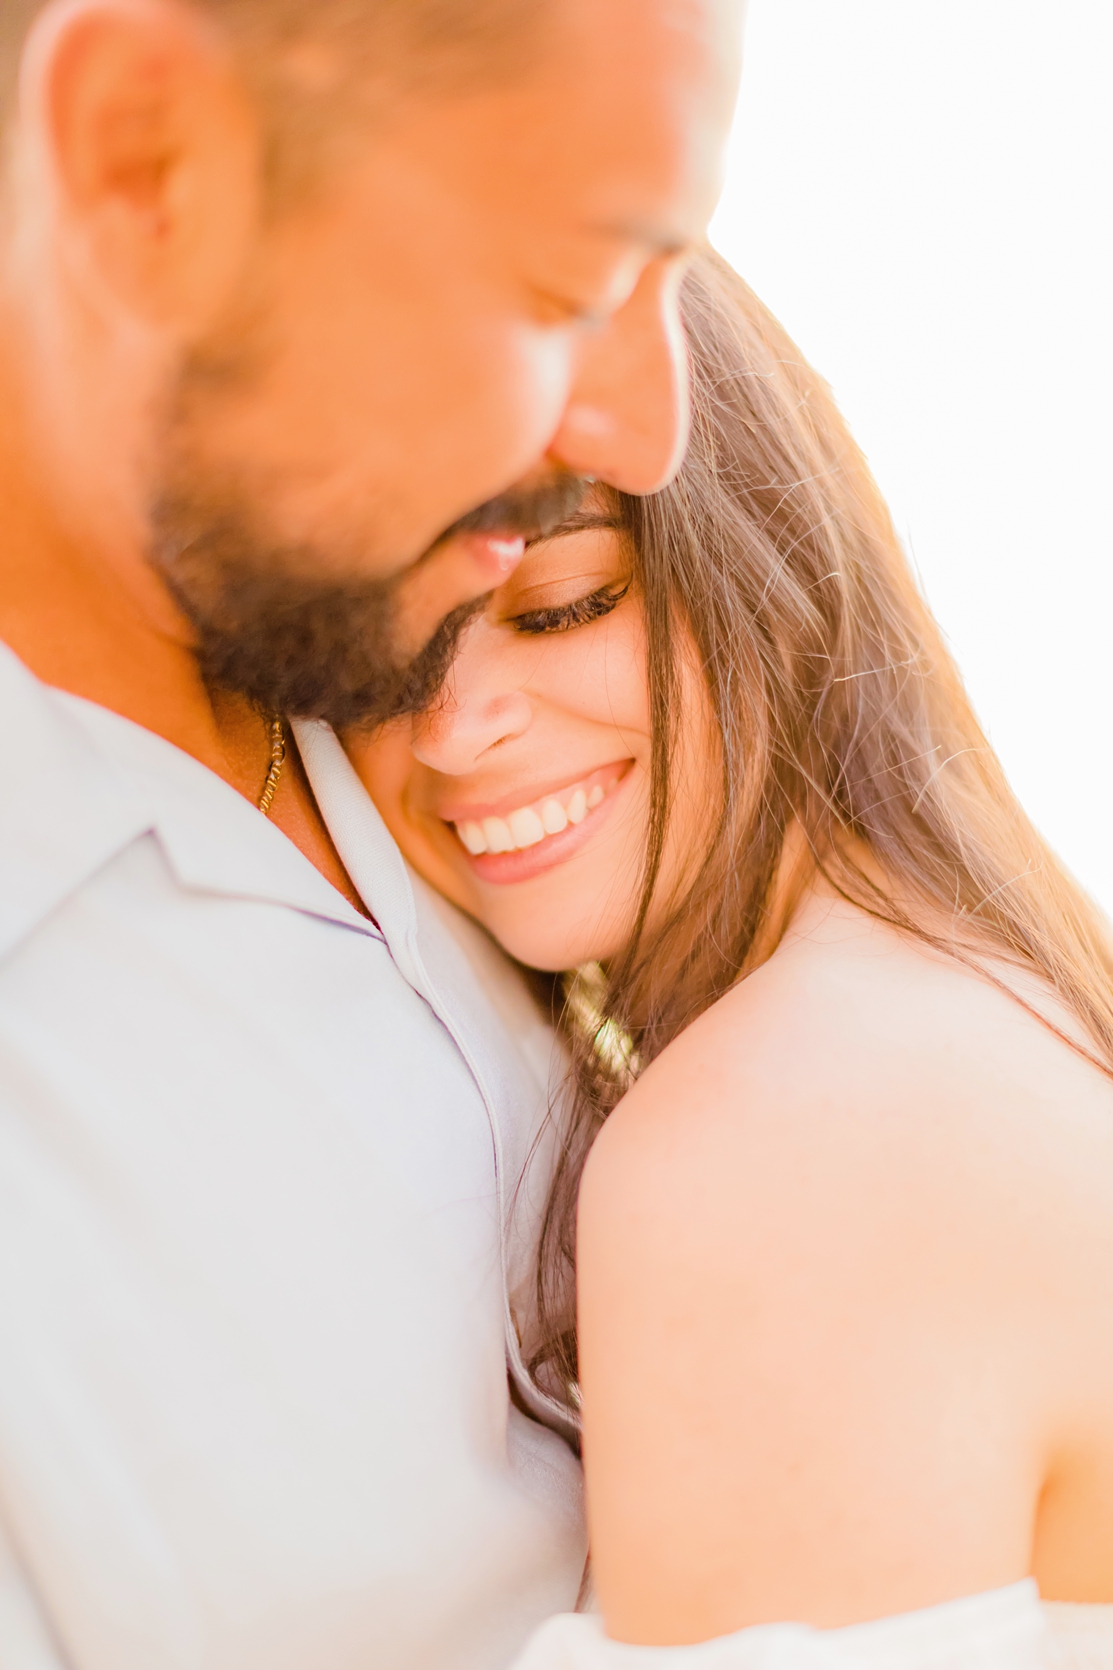 Close up image of couple during their honeymoon on Maui, woman with beautiful smile closing eyes cuddling in to her husband's chest